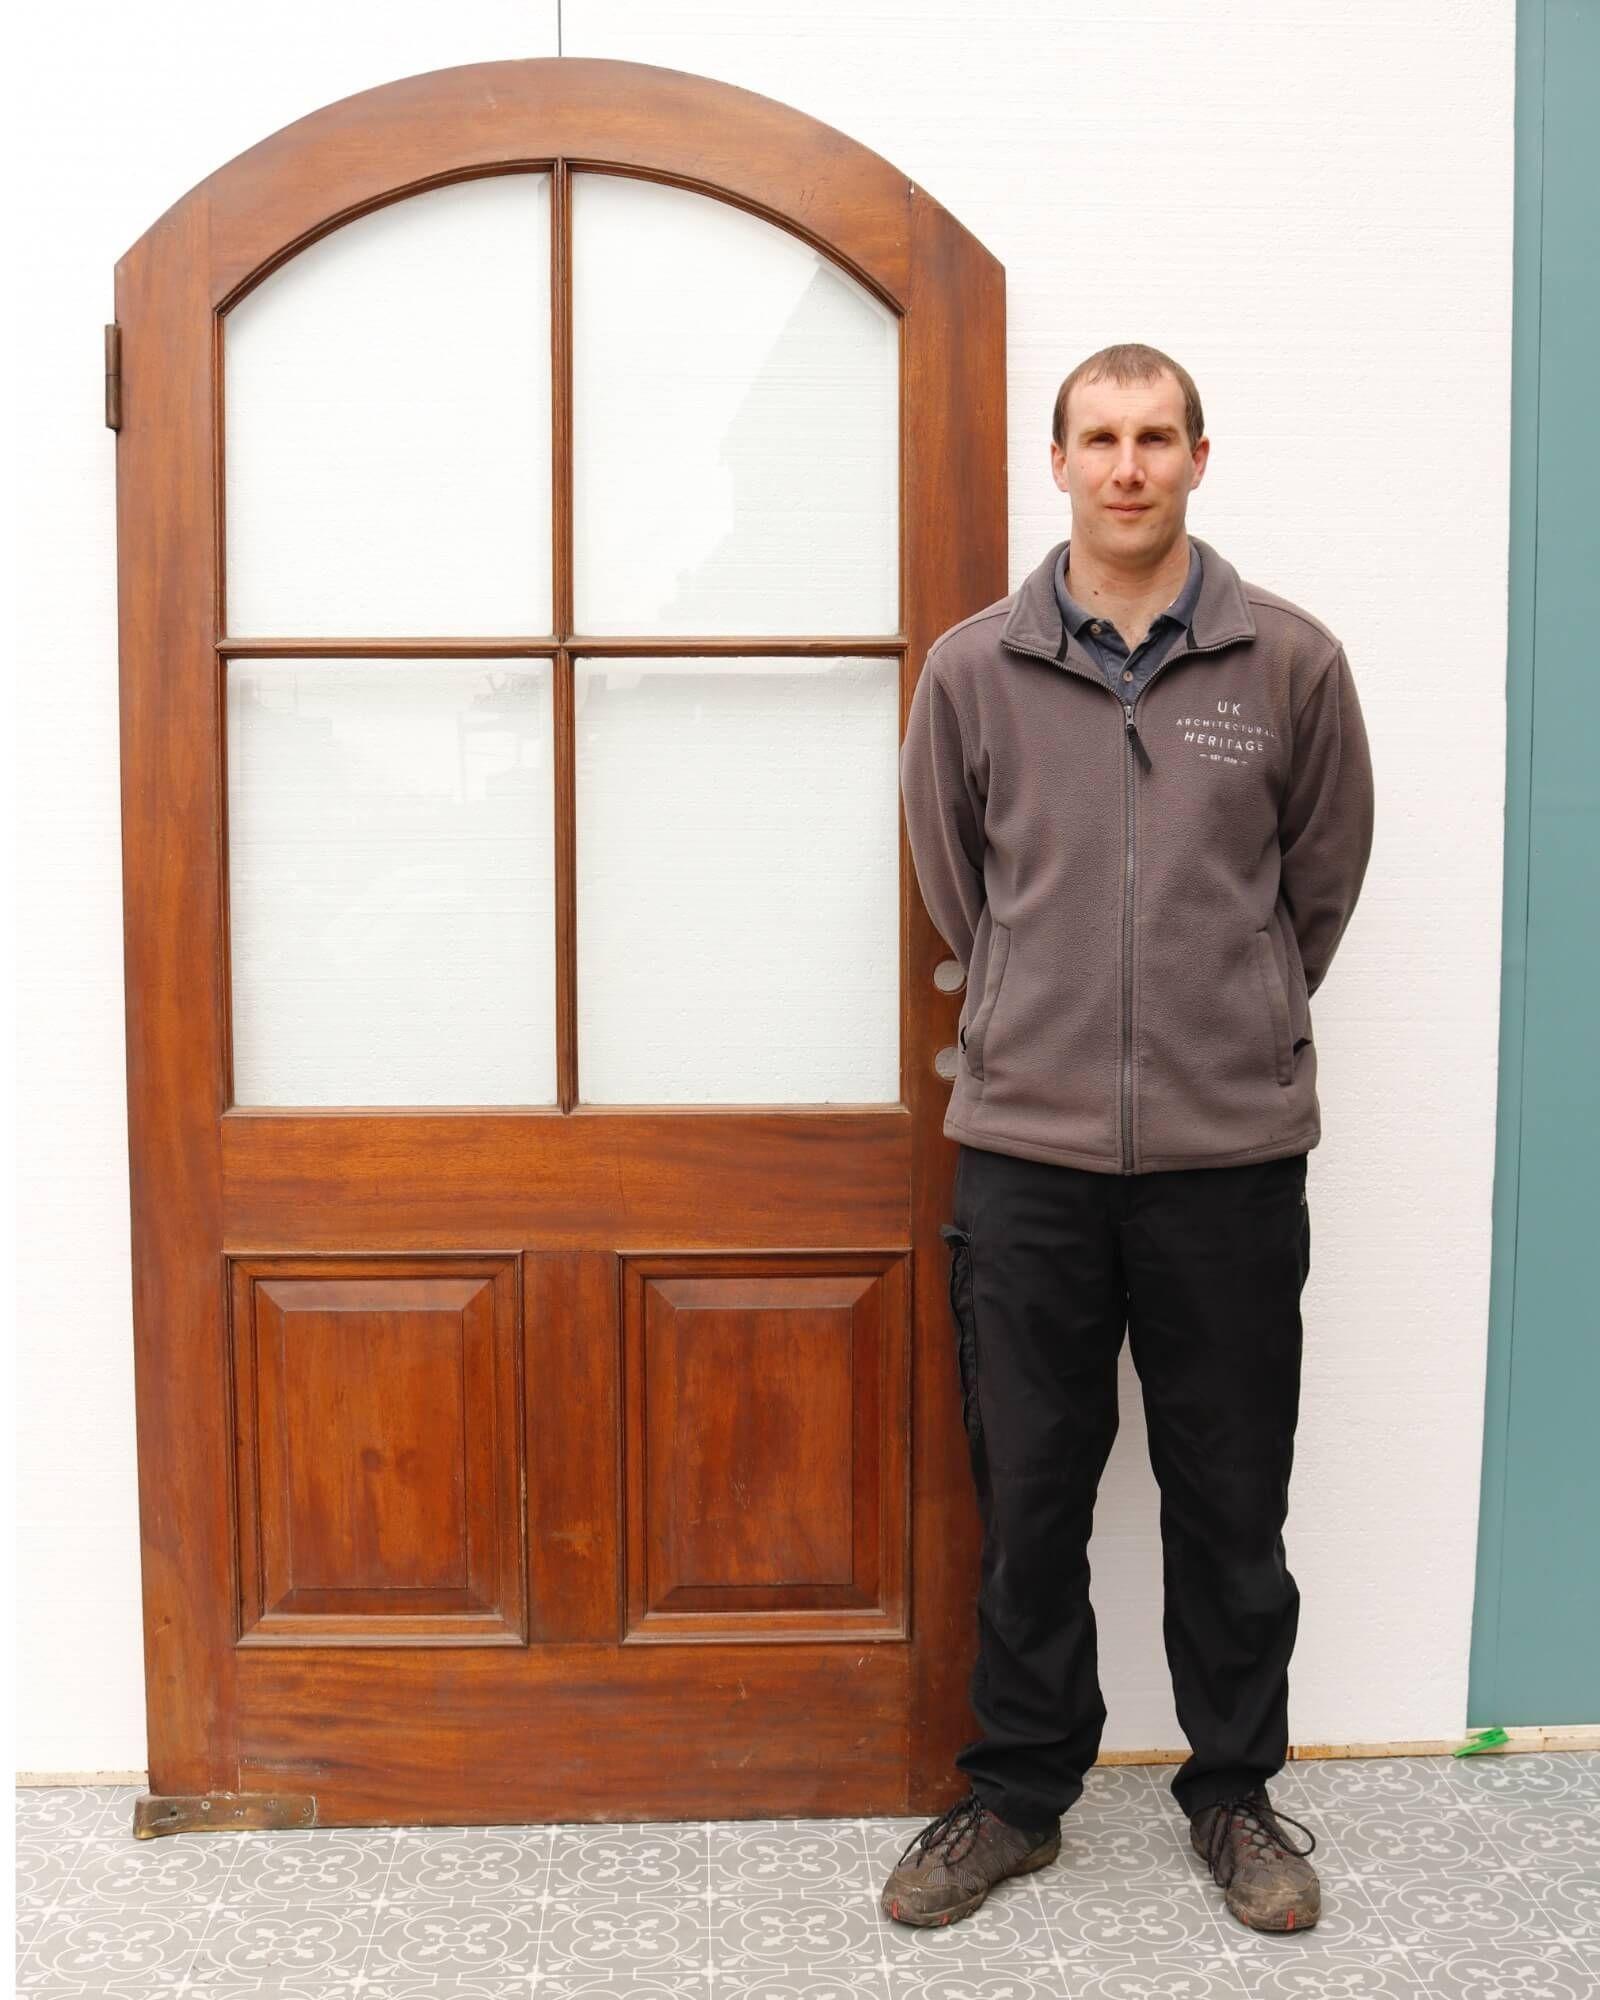 An antique glazed arched interior mahogany door suitable for interior use. This wide scale door was reclaimed from Lincoln Inn Fields, London, from a property near to the Soane’s museum. It incorporates Victorian and Edwardian styles, with two